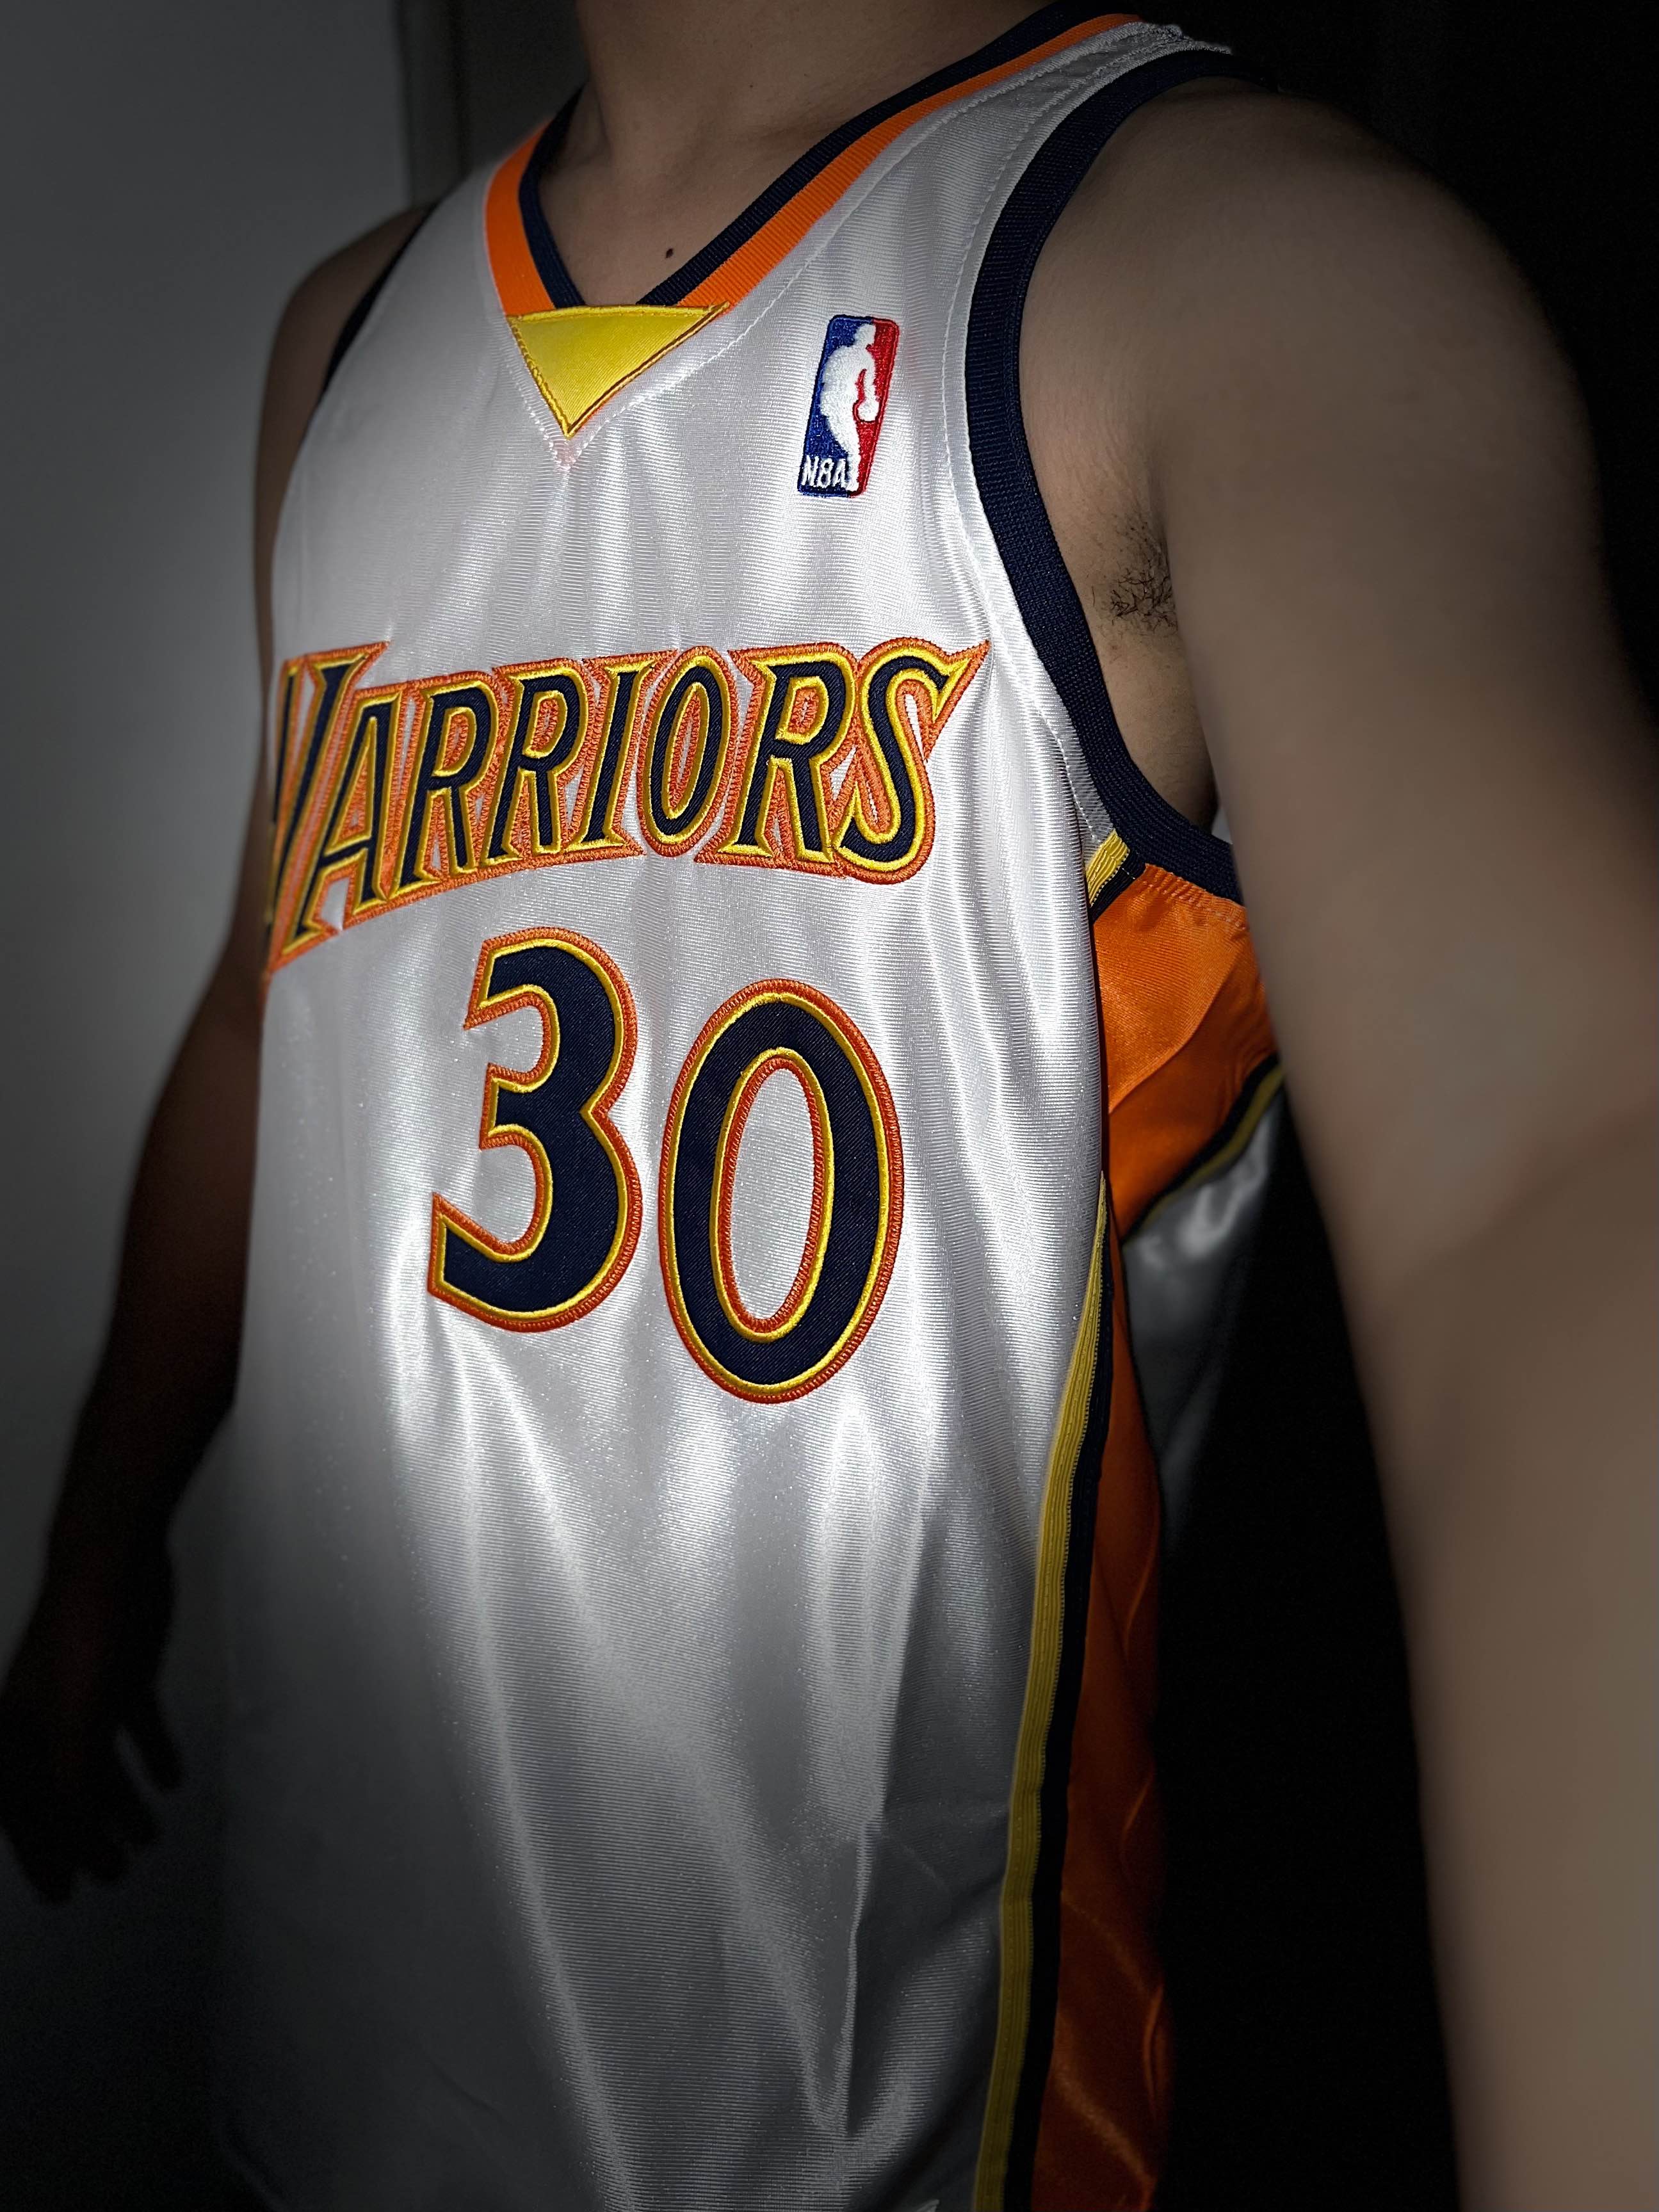 US$ 26.00 - 2009-10 WARRIORS CURRY #30 White Retro Top Quality Hot